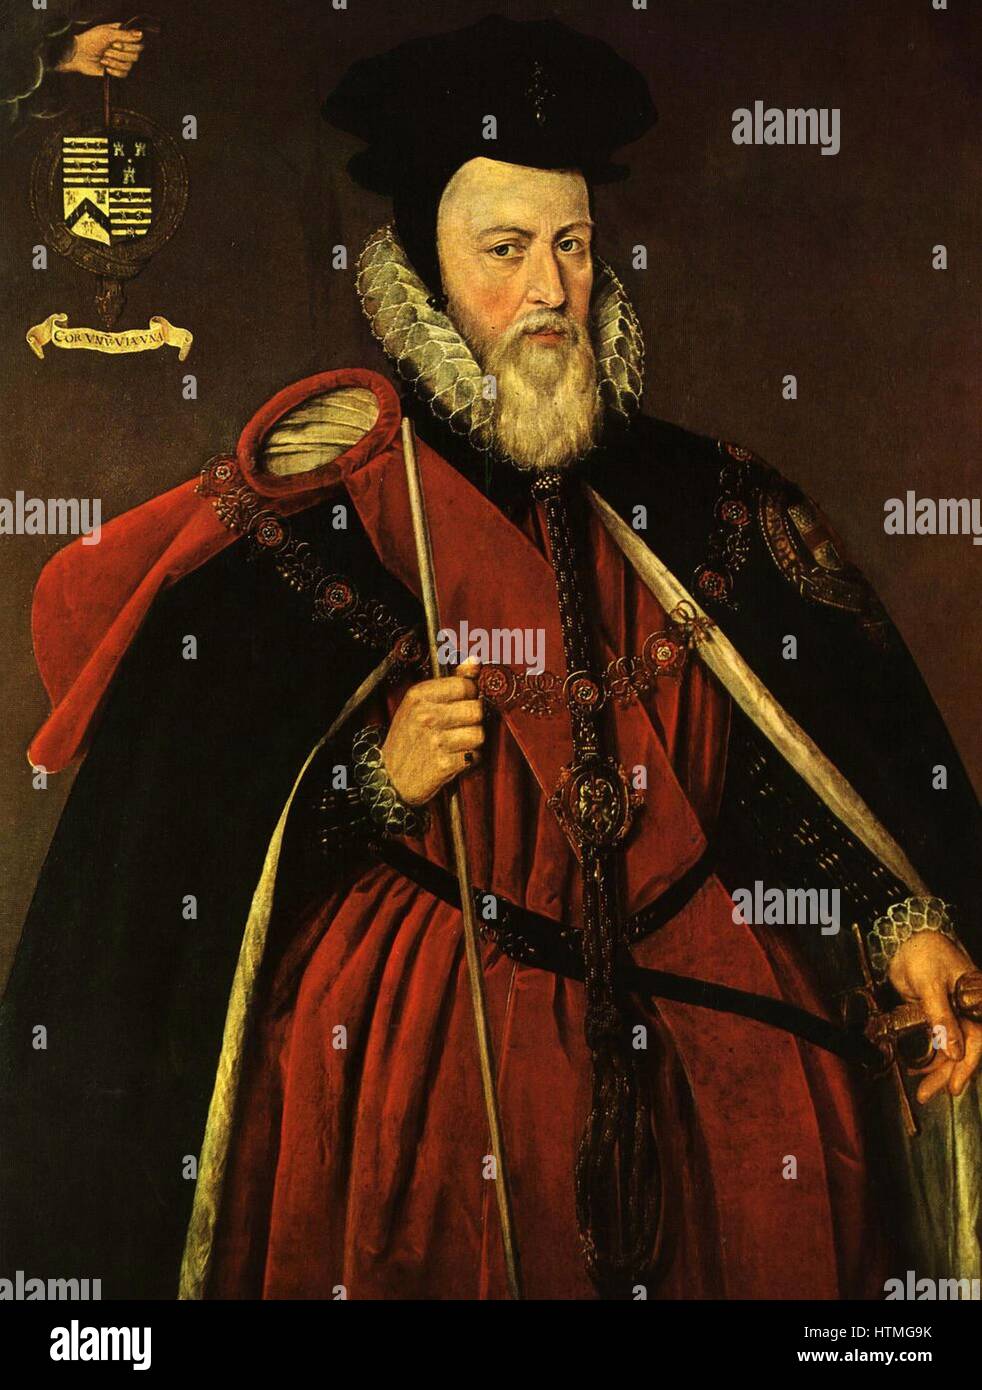 William Cecil, lst Baron Burghley (1520-1598) appointed Secretary of State by Elizabeth I in 1558 and was the prominent English statesman of his age. Cecil in the robes of the Order of the Garter. Portrait by Marcus Gheeraerts the Younger (1561-1635). Stock Photo